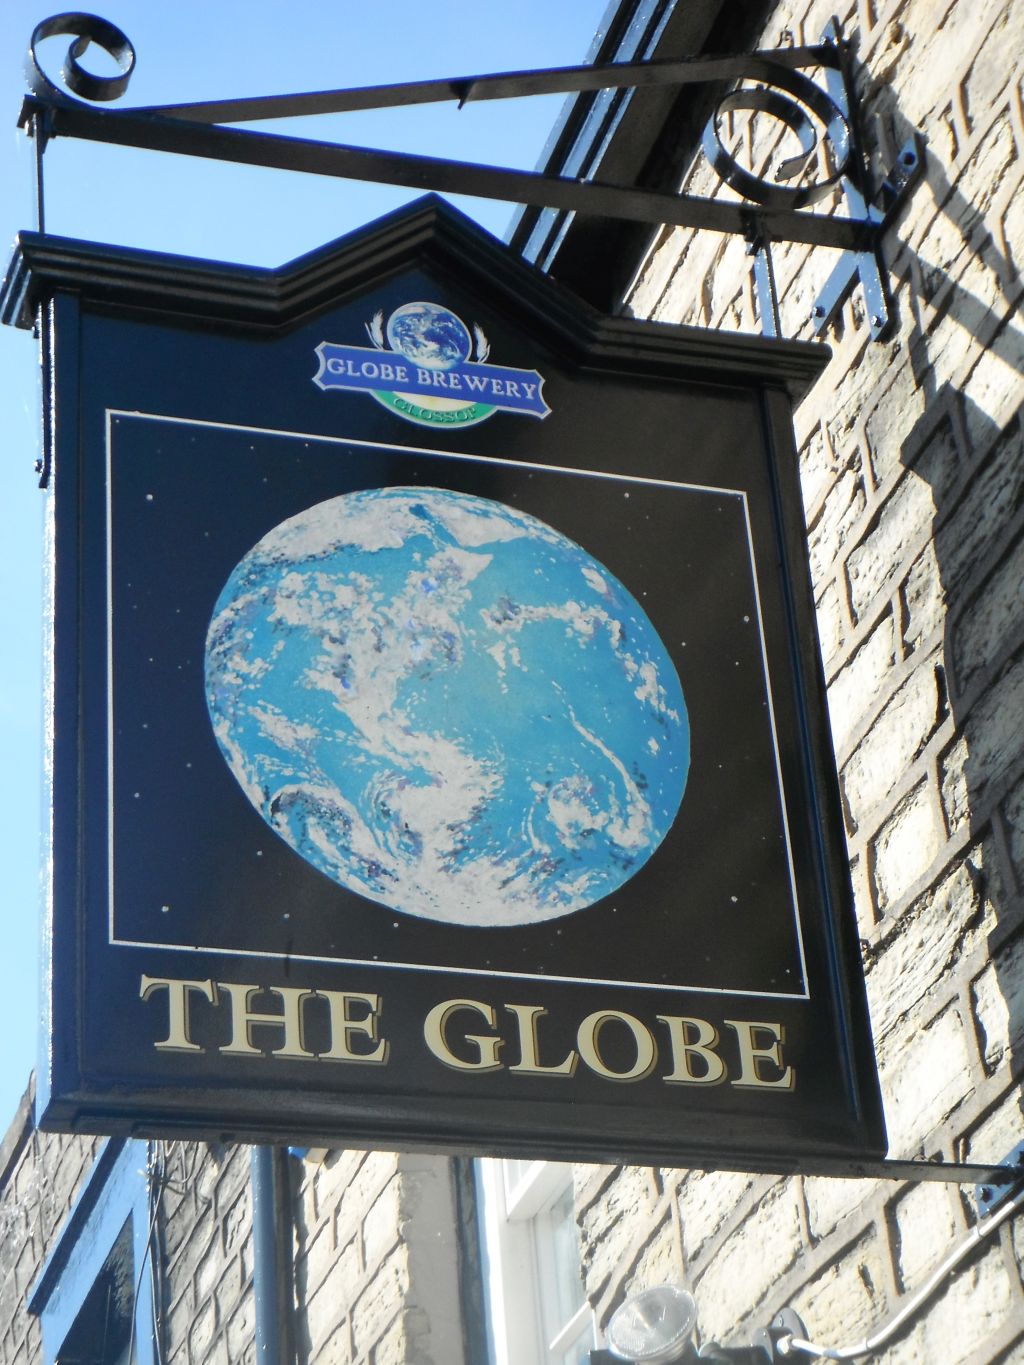 Photo taken by me – The Globe pub sign – Glossop, Manchester. 